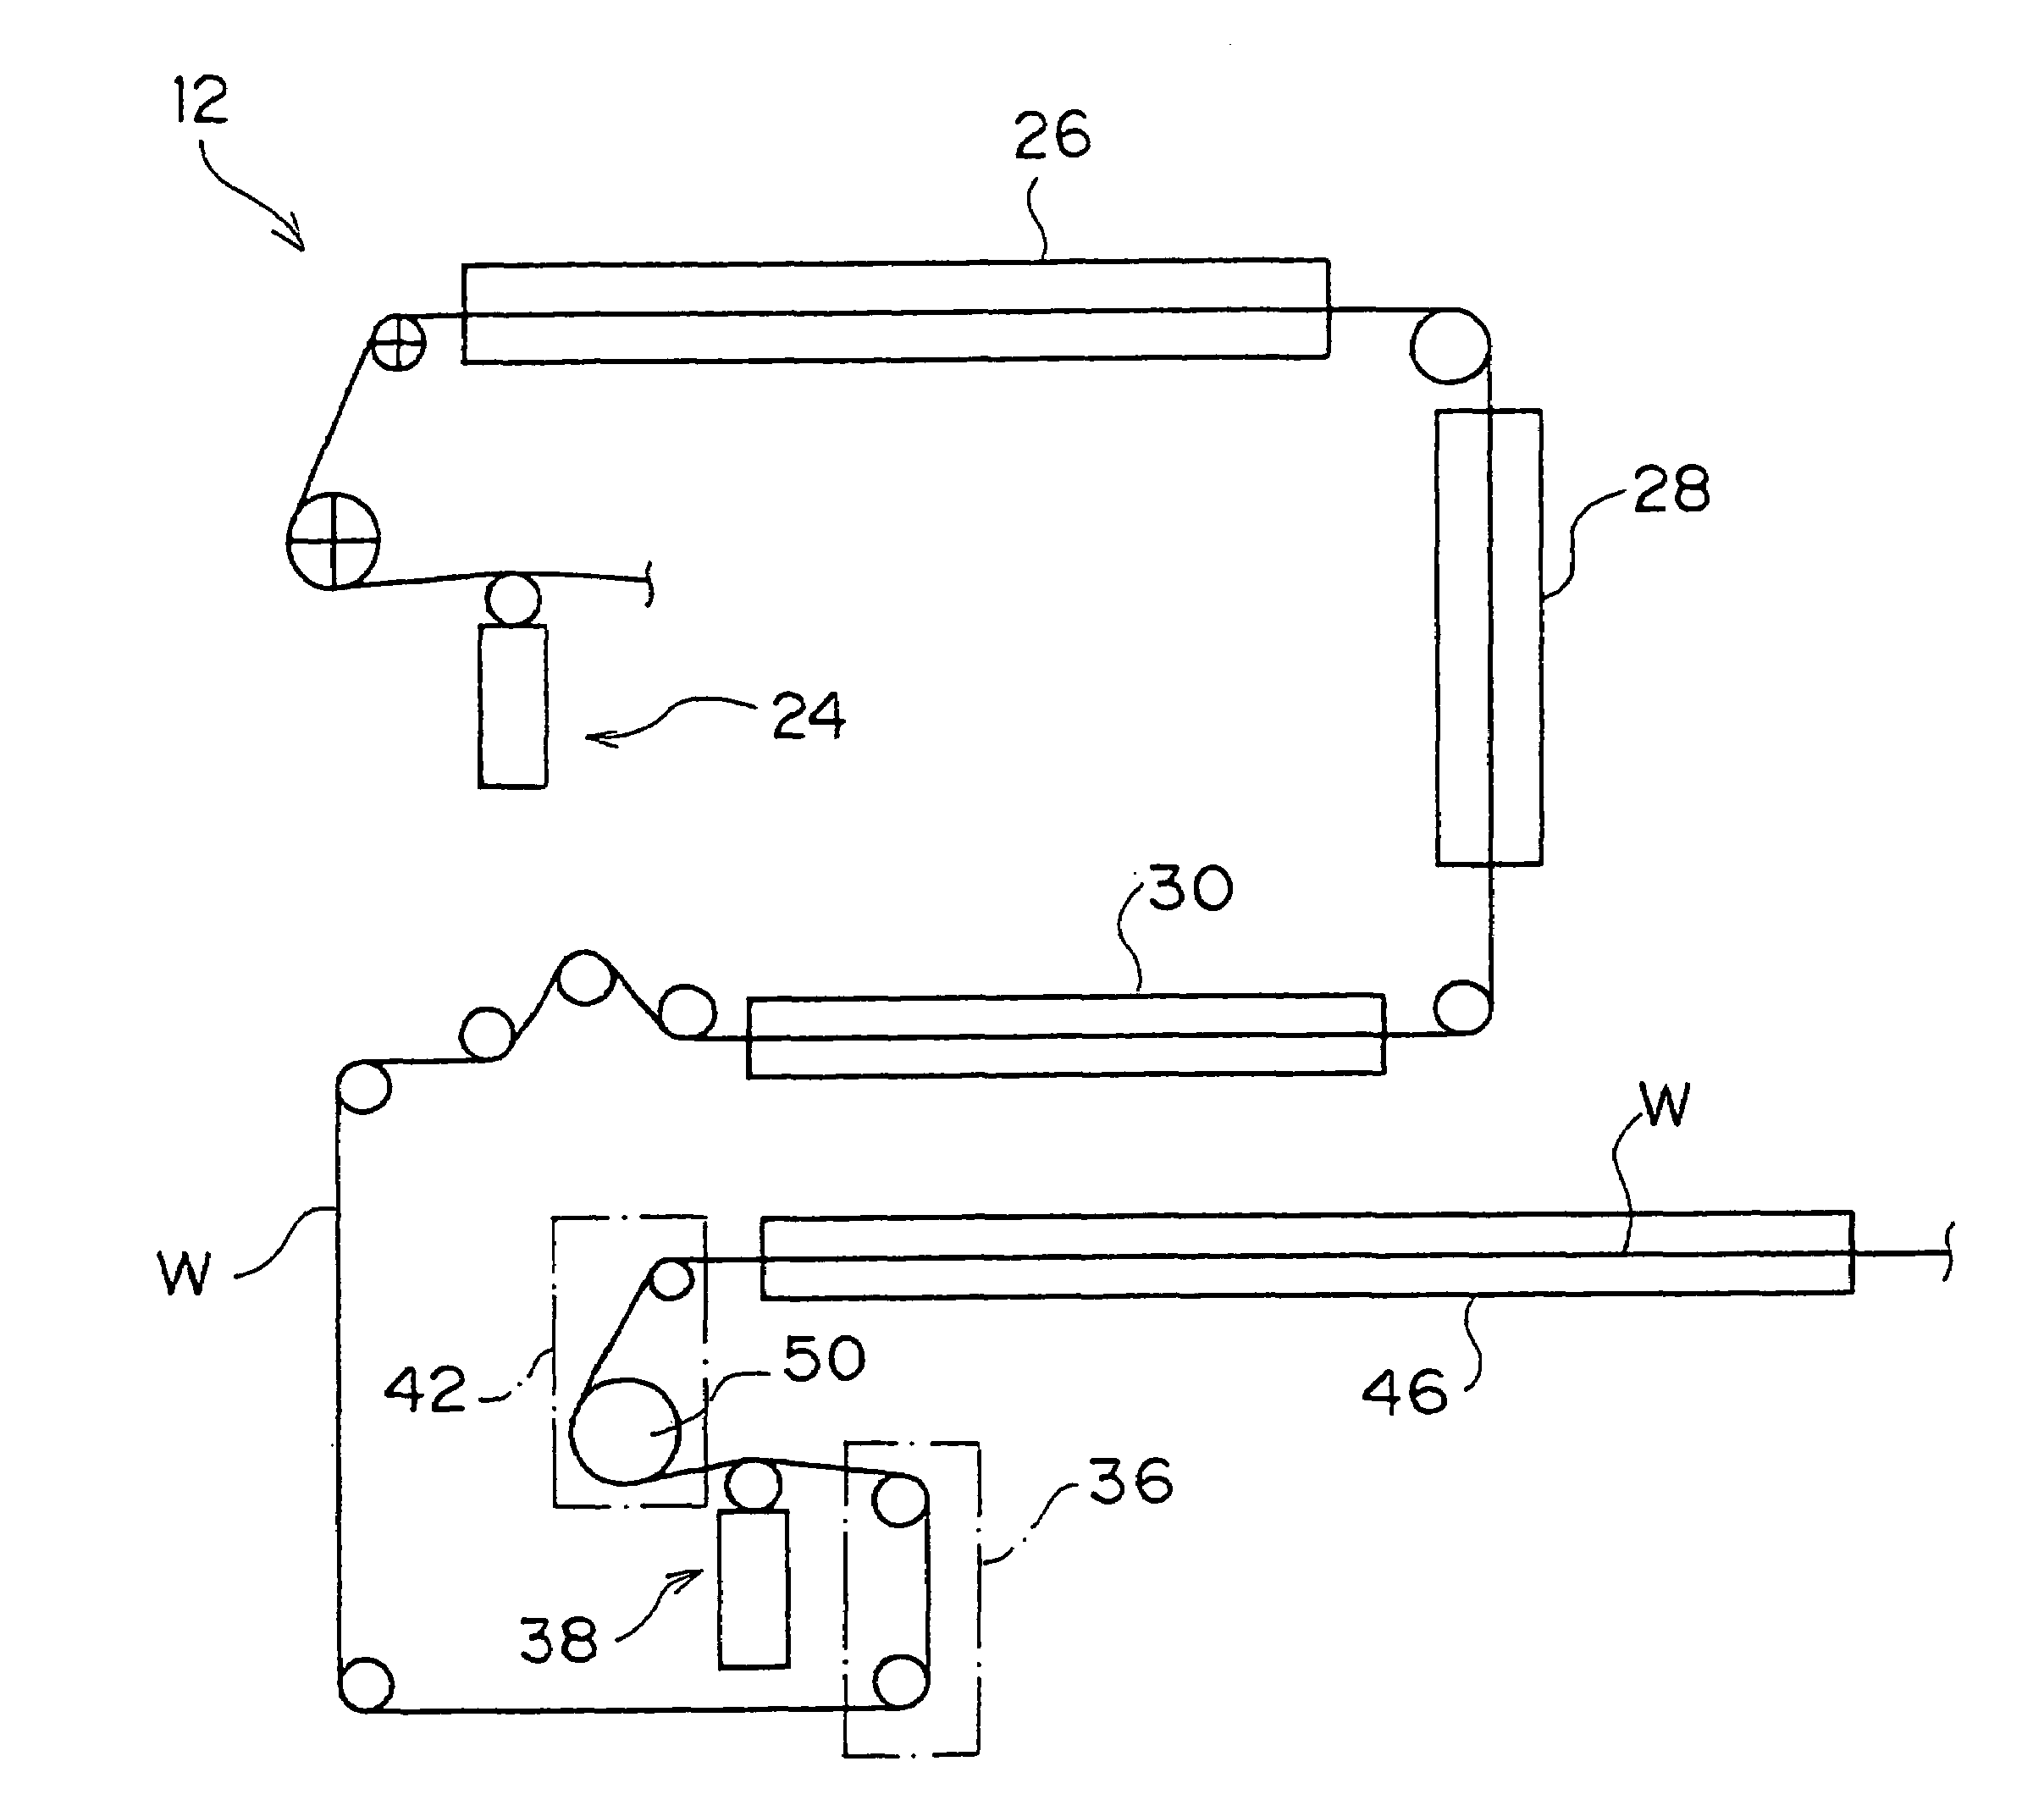 Photosensitive planographic printing plate and method of producing the same